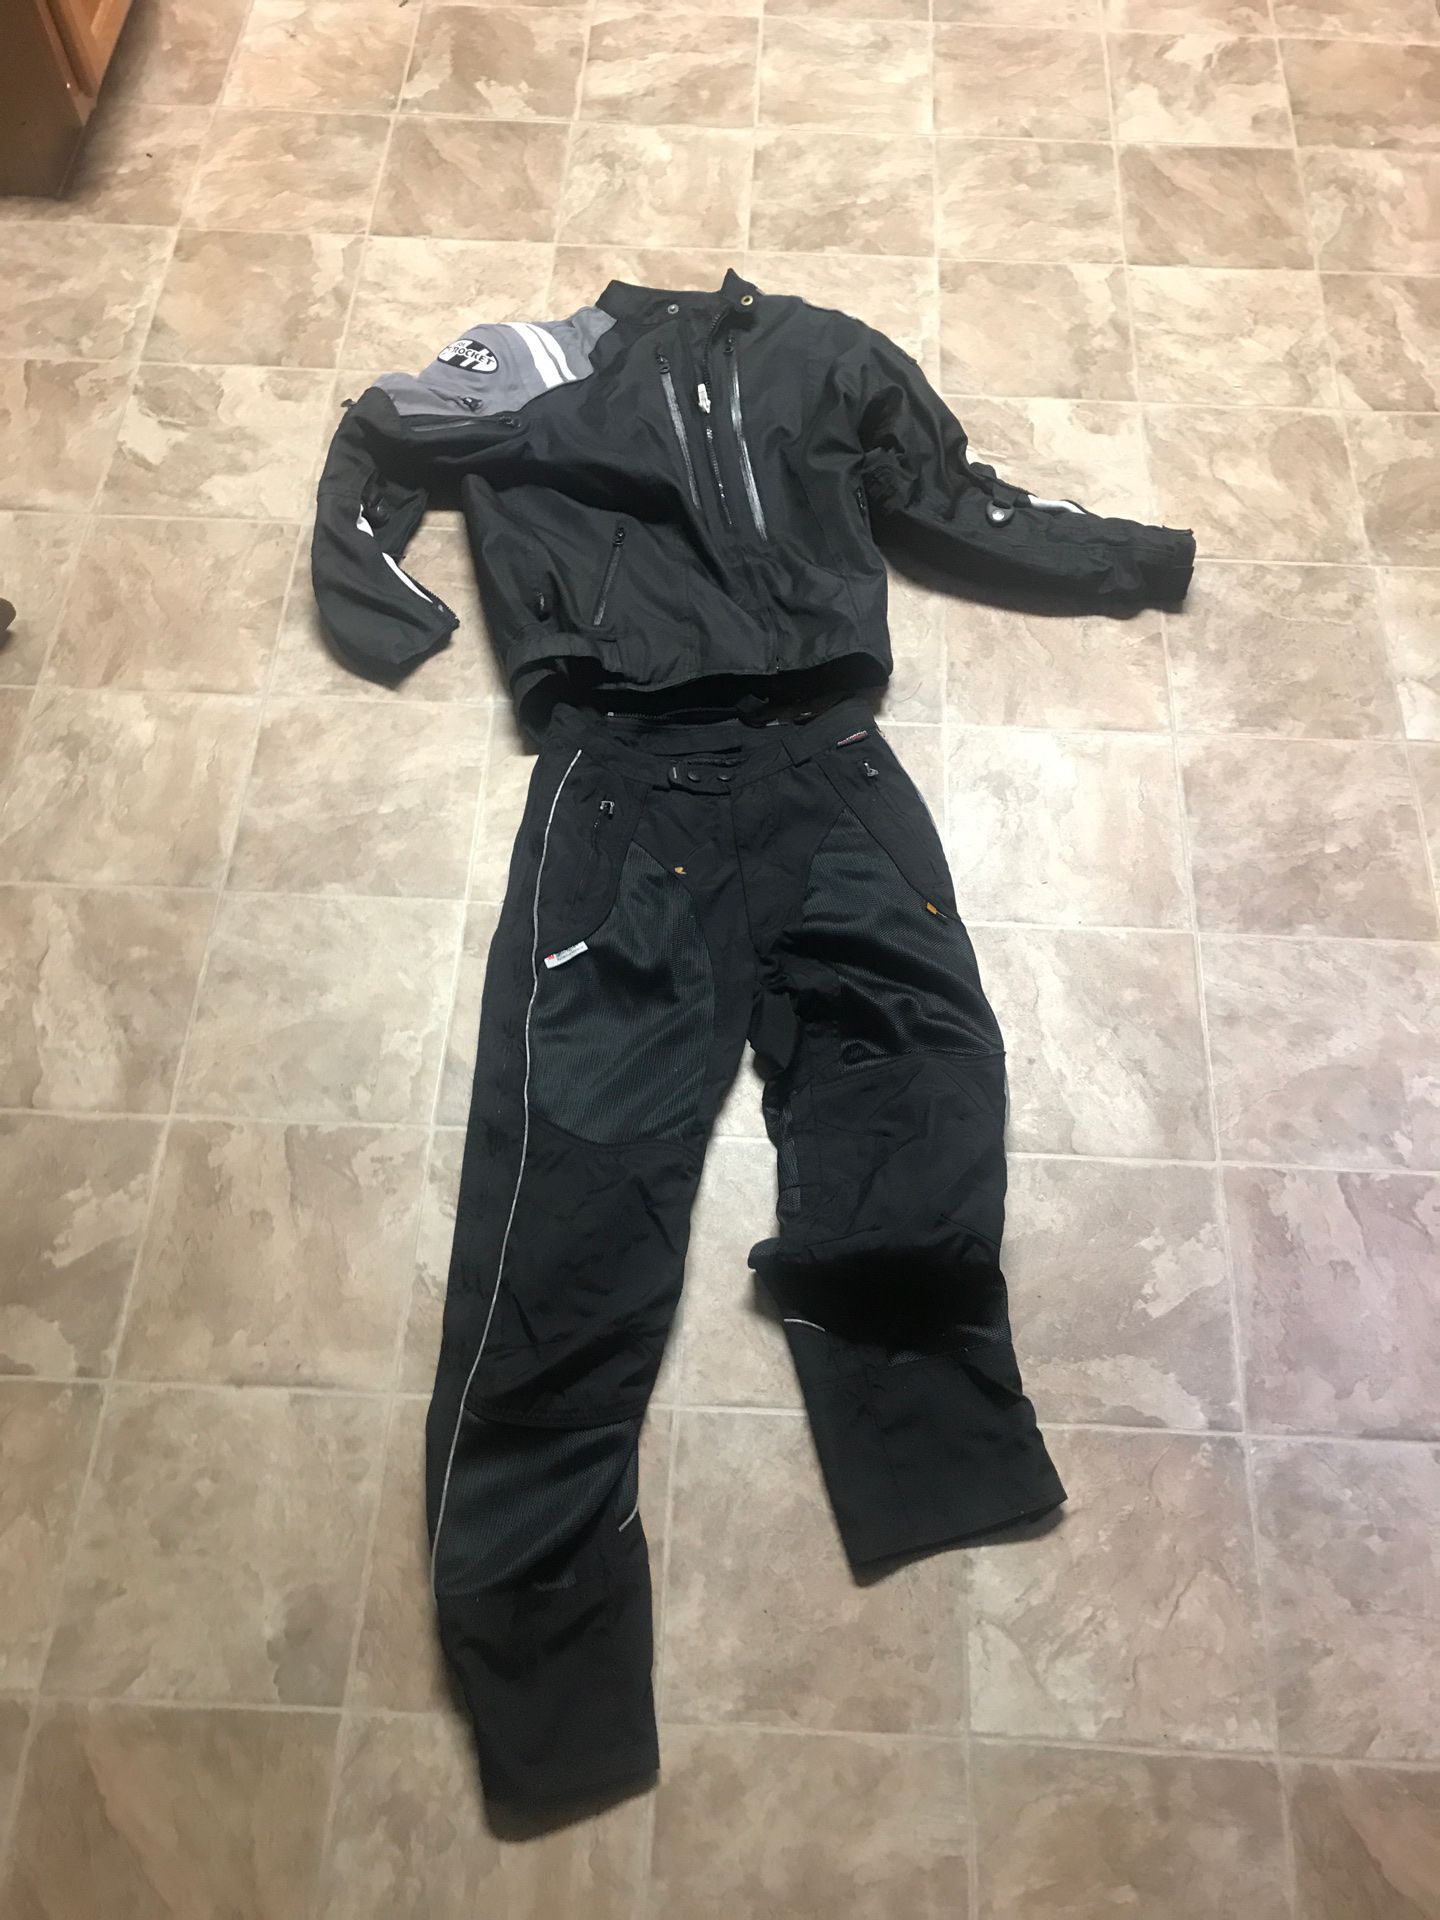 Motorcycle gear Or Trade